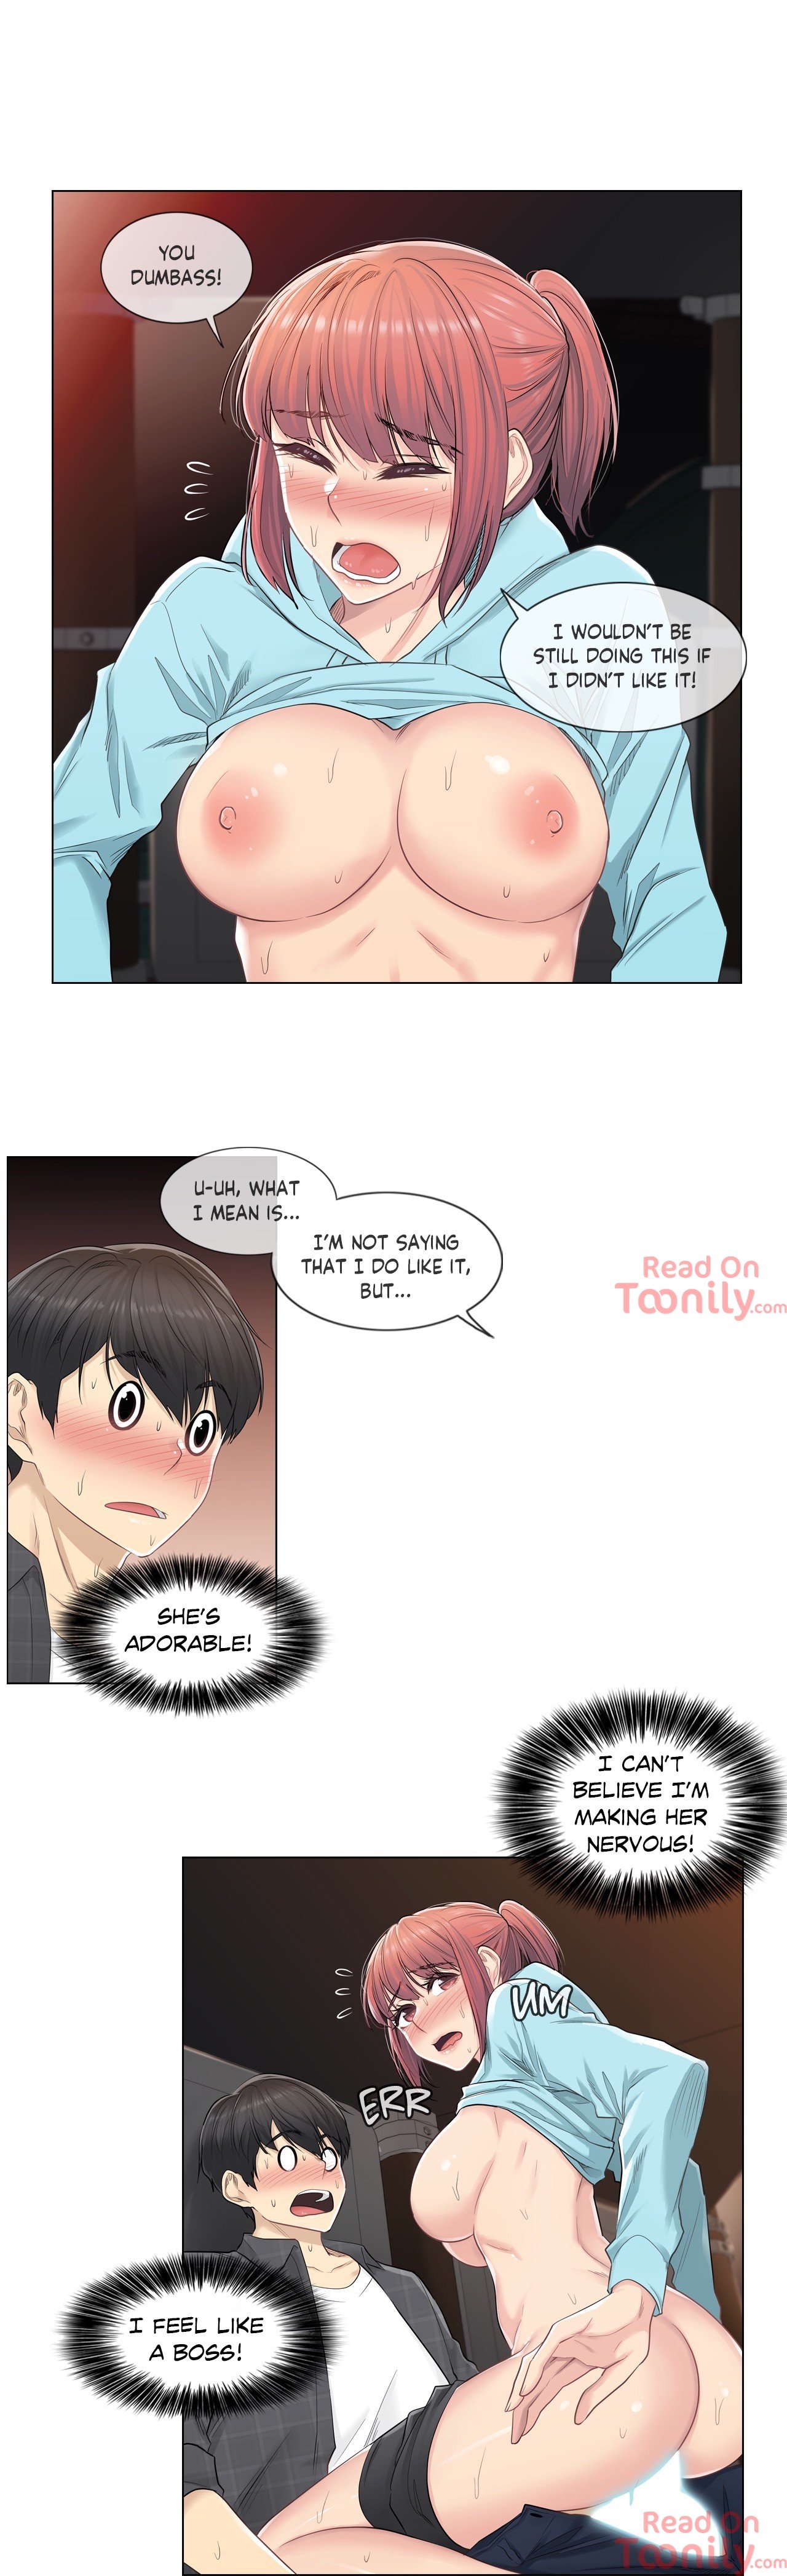 touch-to-unlock-chap-3-17